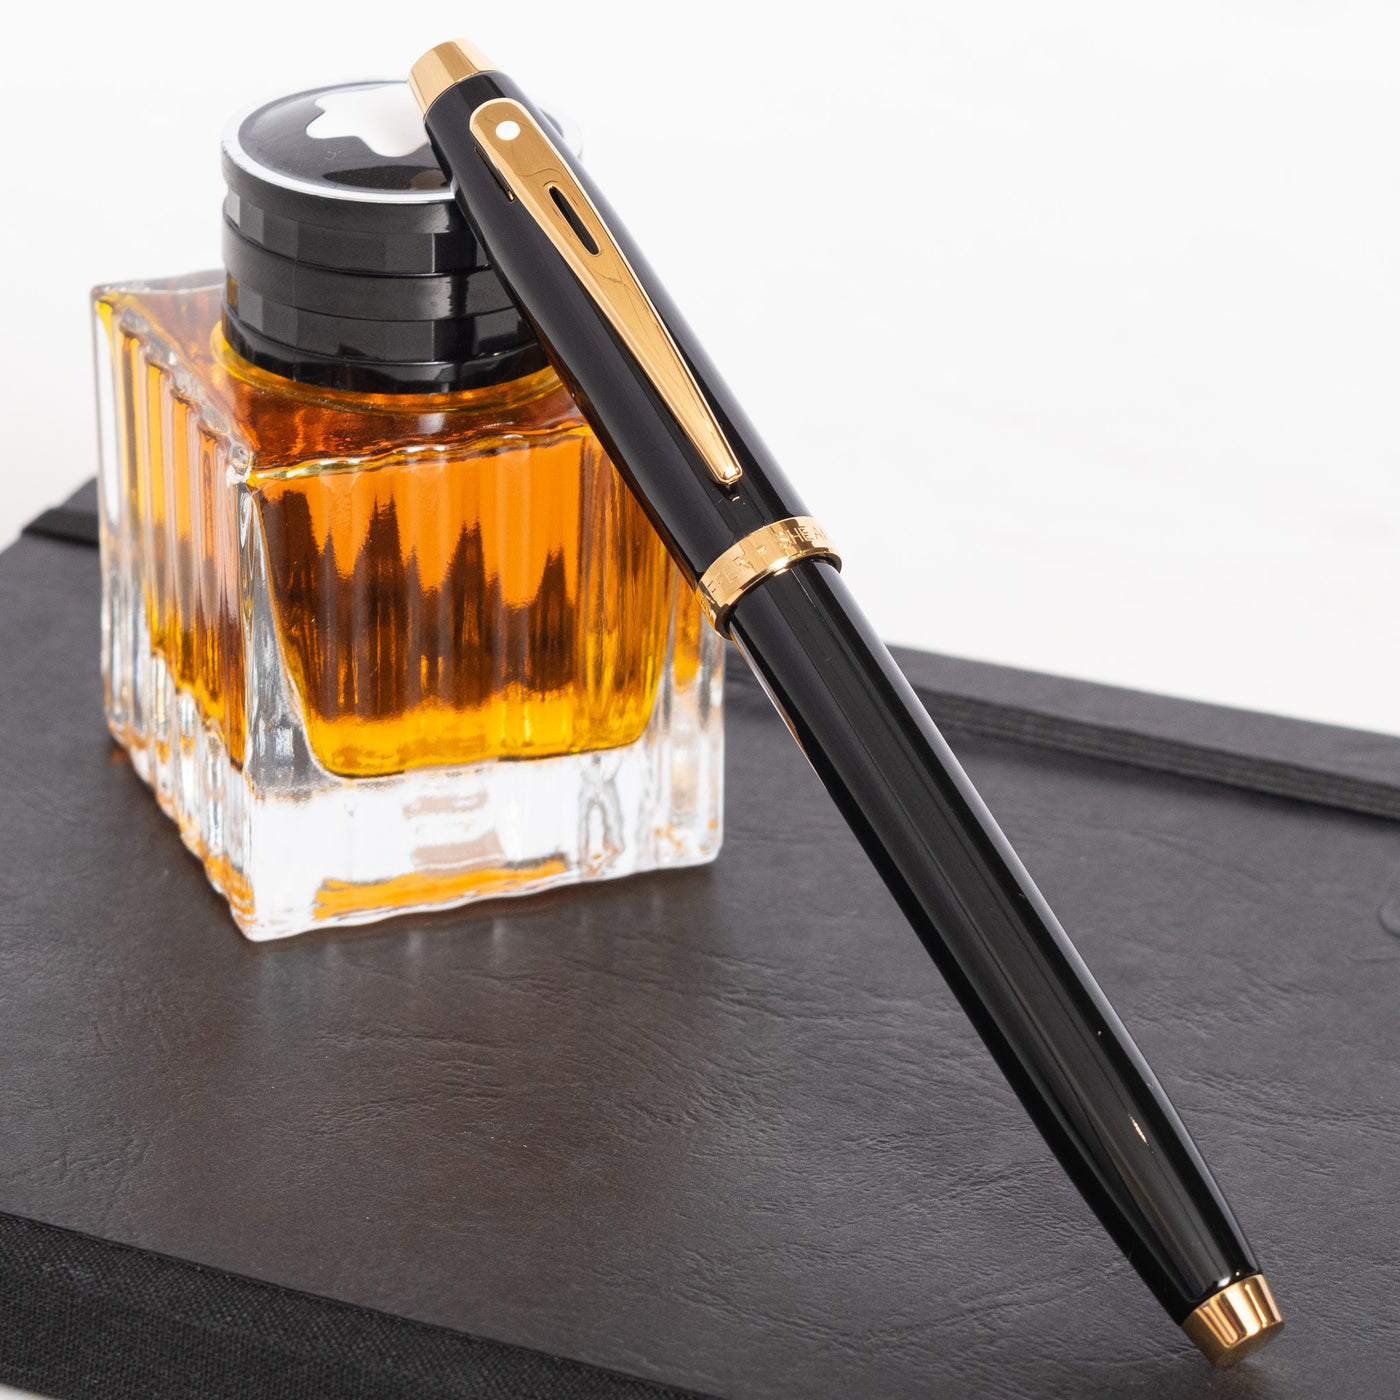 Sheaffer 100 Fountain Pen - Black with Gold Trim capped